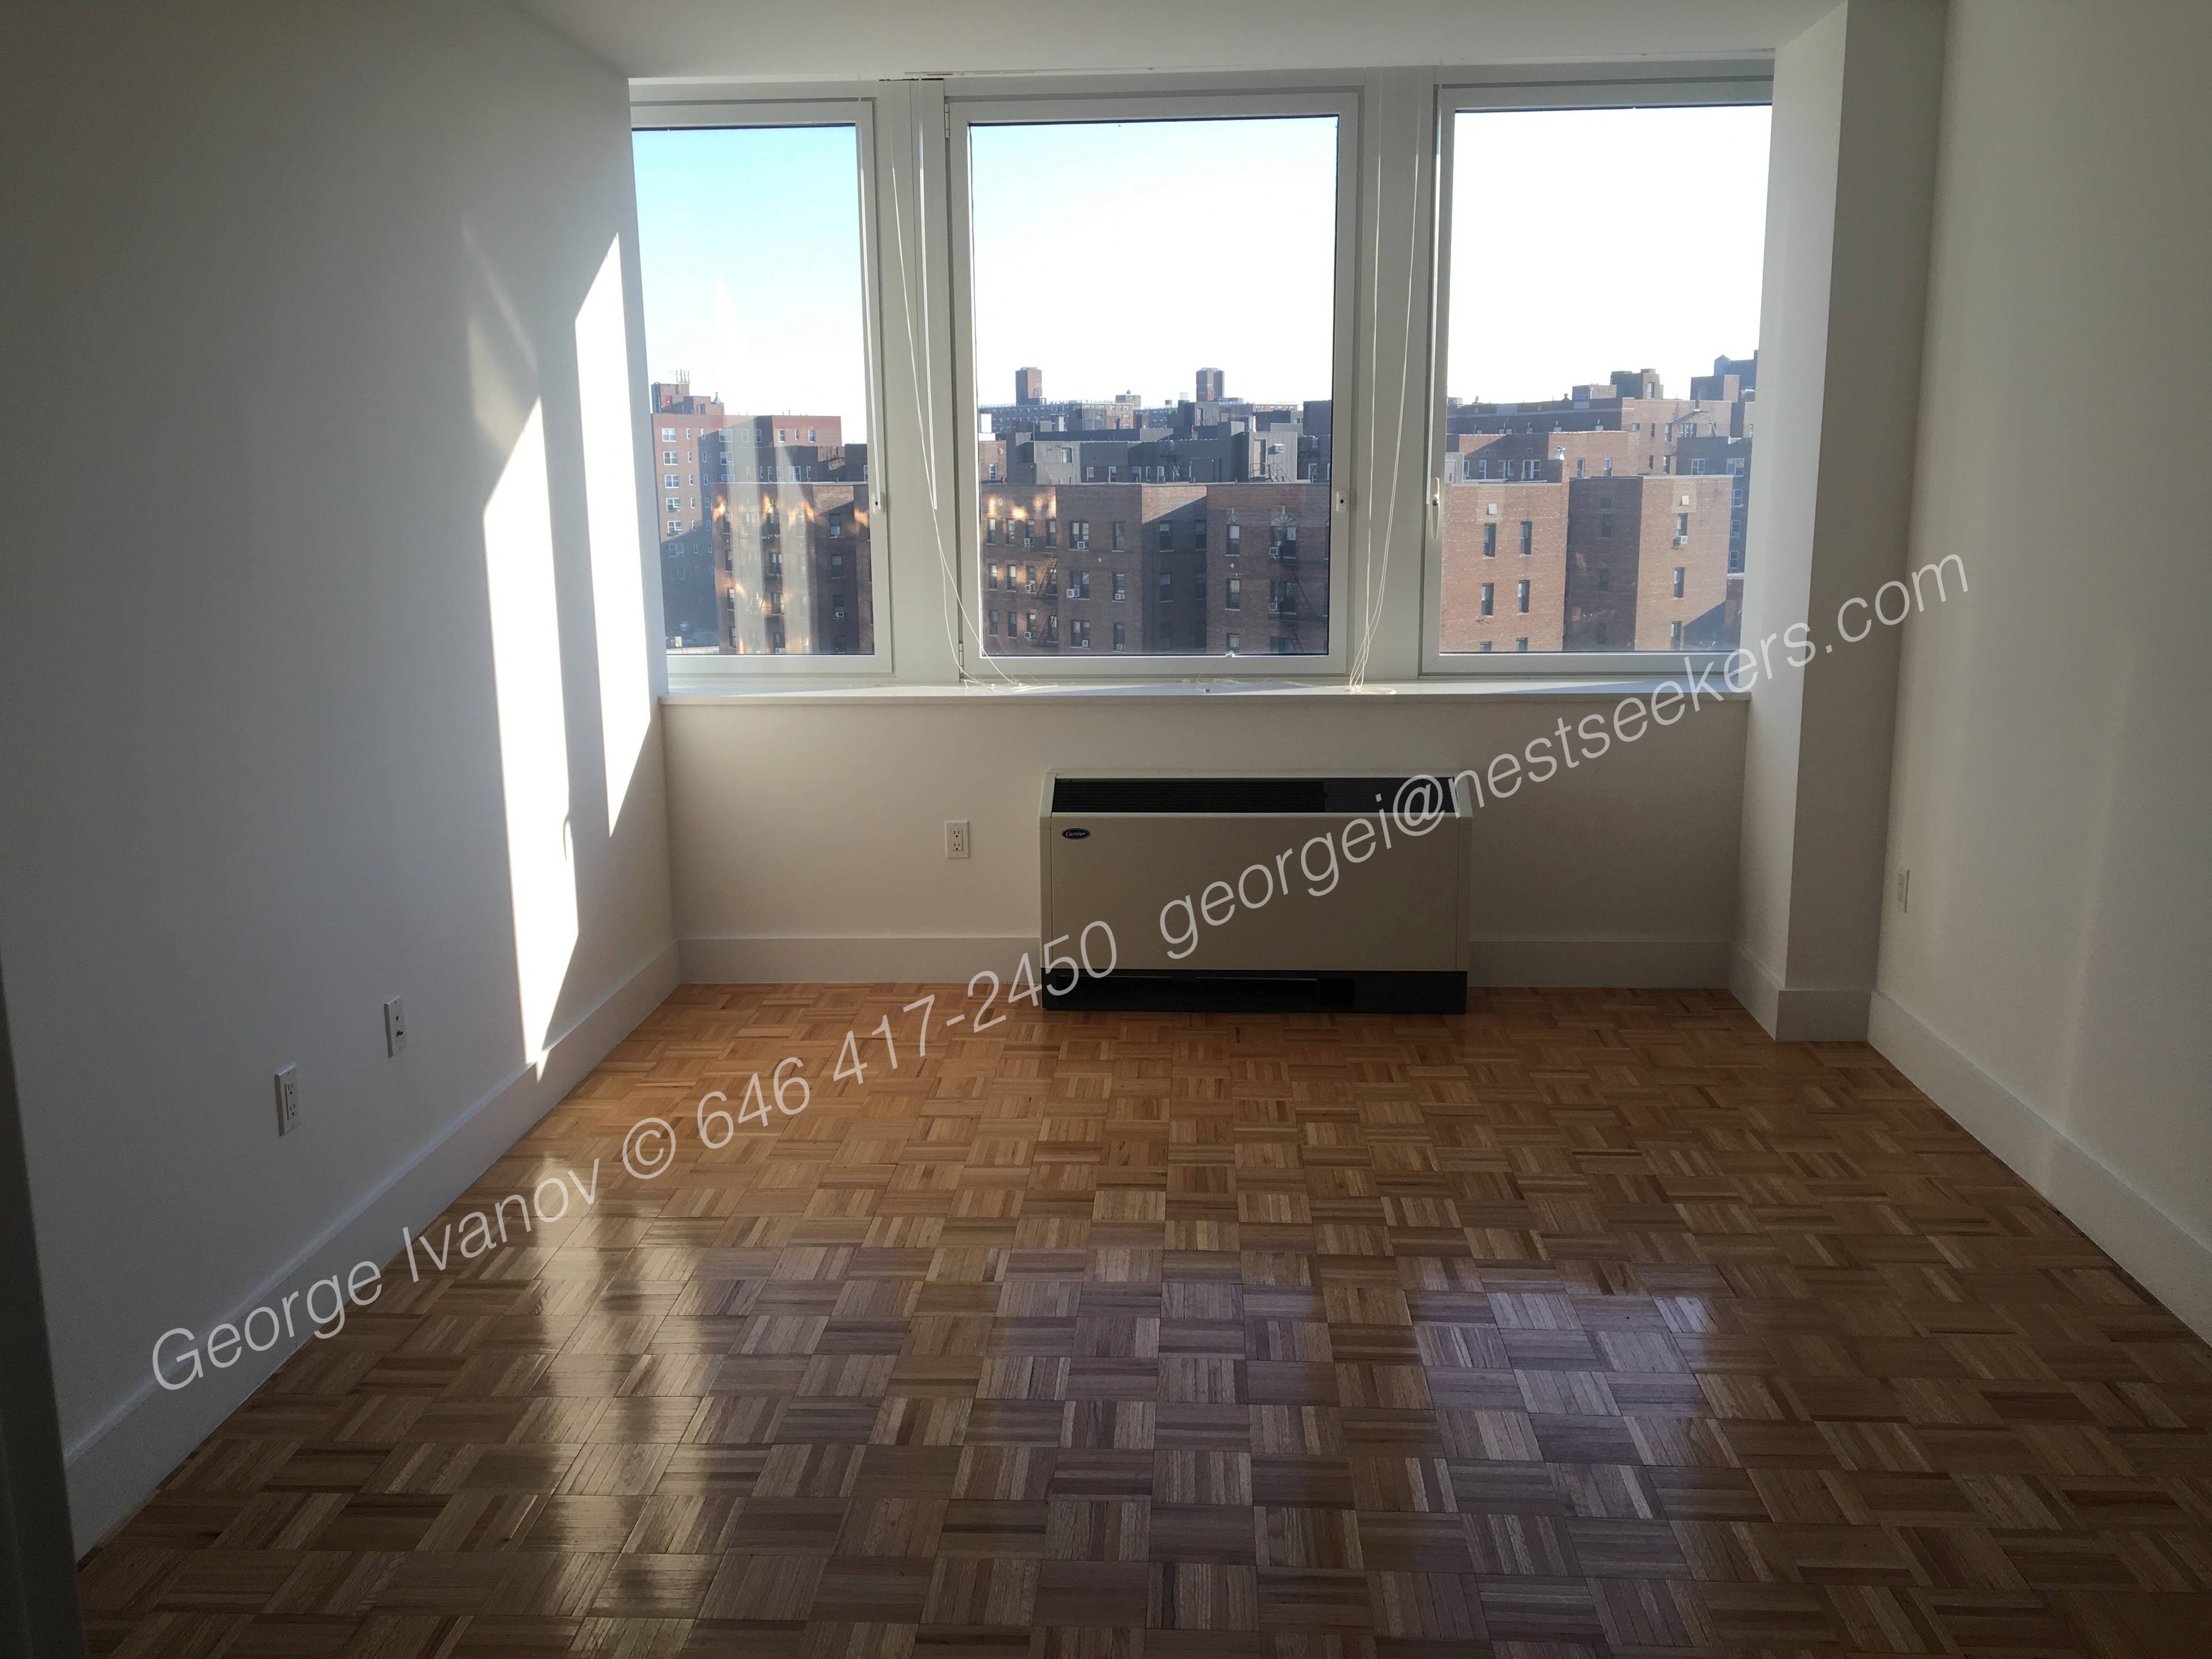 ★★Long Island City ★  ULTRA LUXURY  Apartments .  Condo Style Finishes .  Washer & Dryer in UNIT.24Hr Doorman, SPECTACULAR AMENETIES. 10 min to MIdtown Manhattan